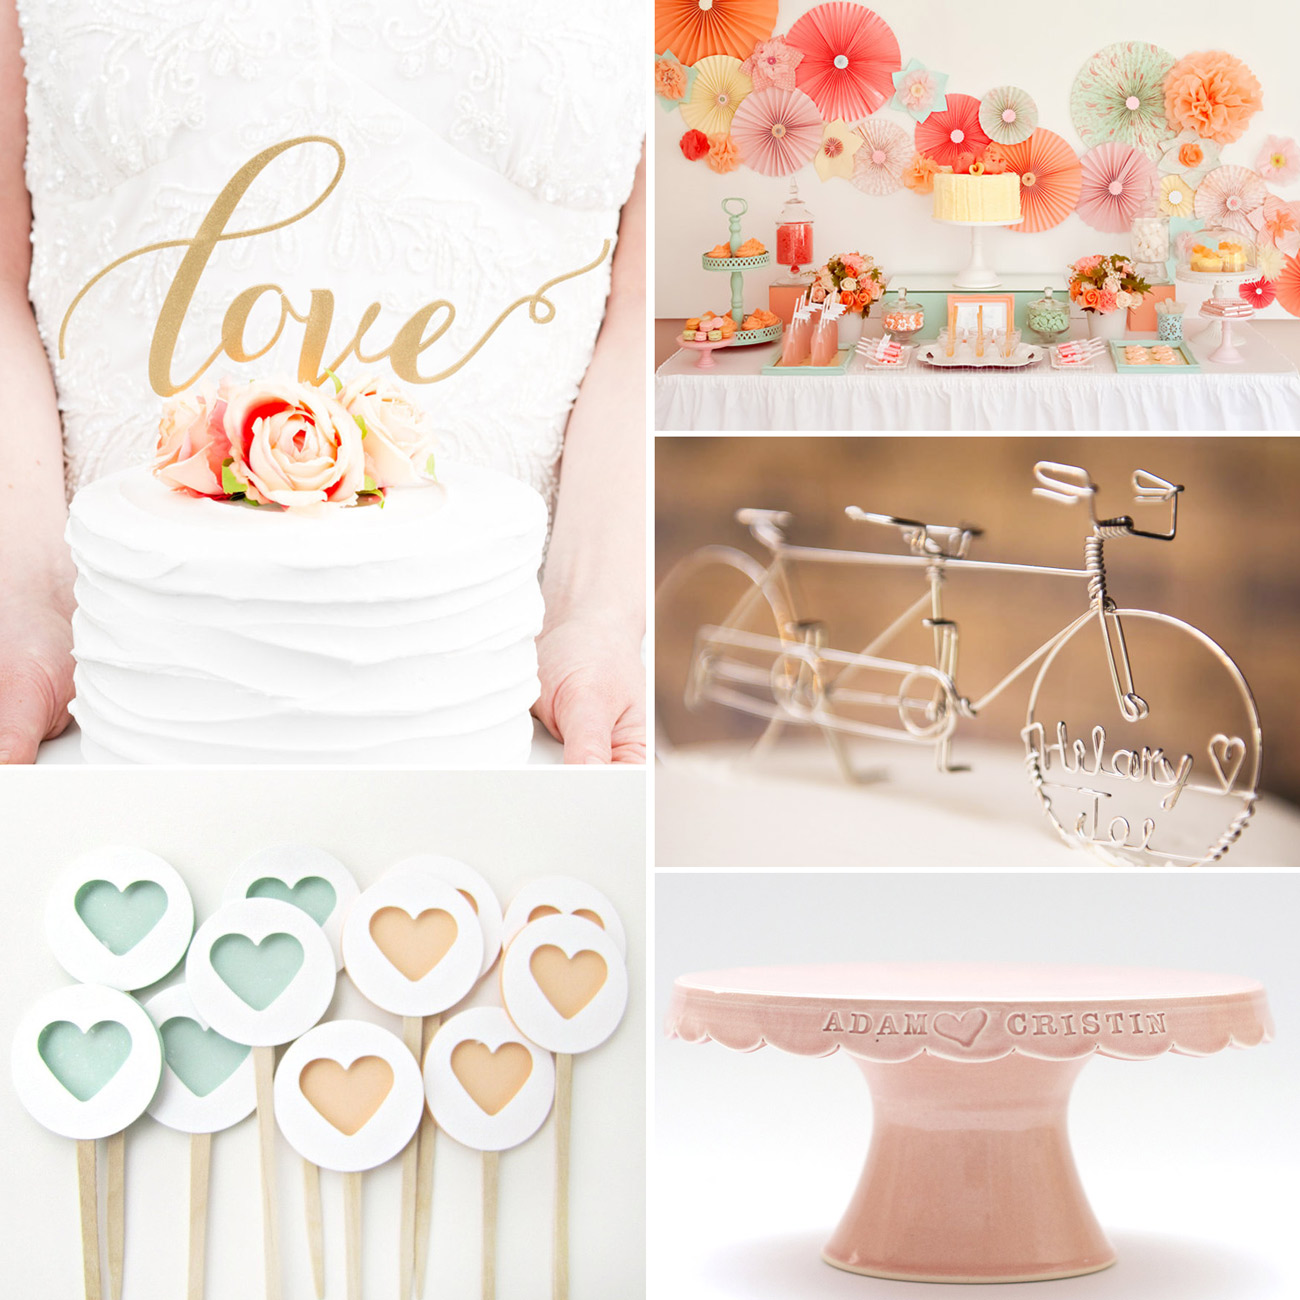 Etsy Cake Stands and Cake Toppers